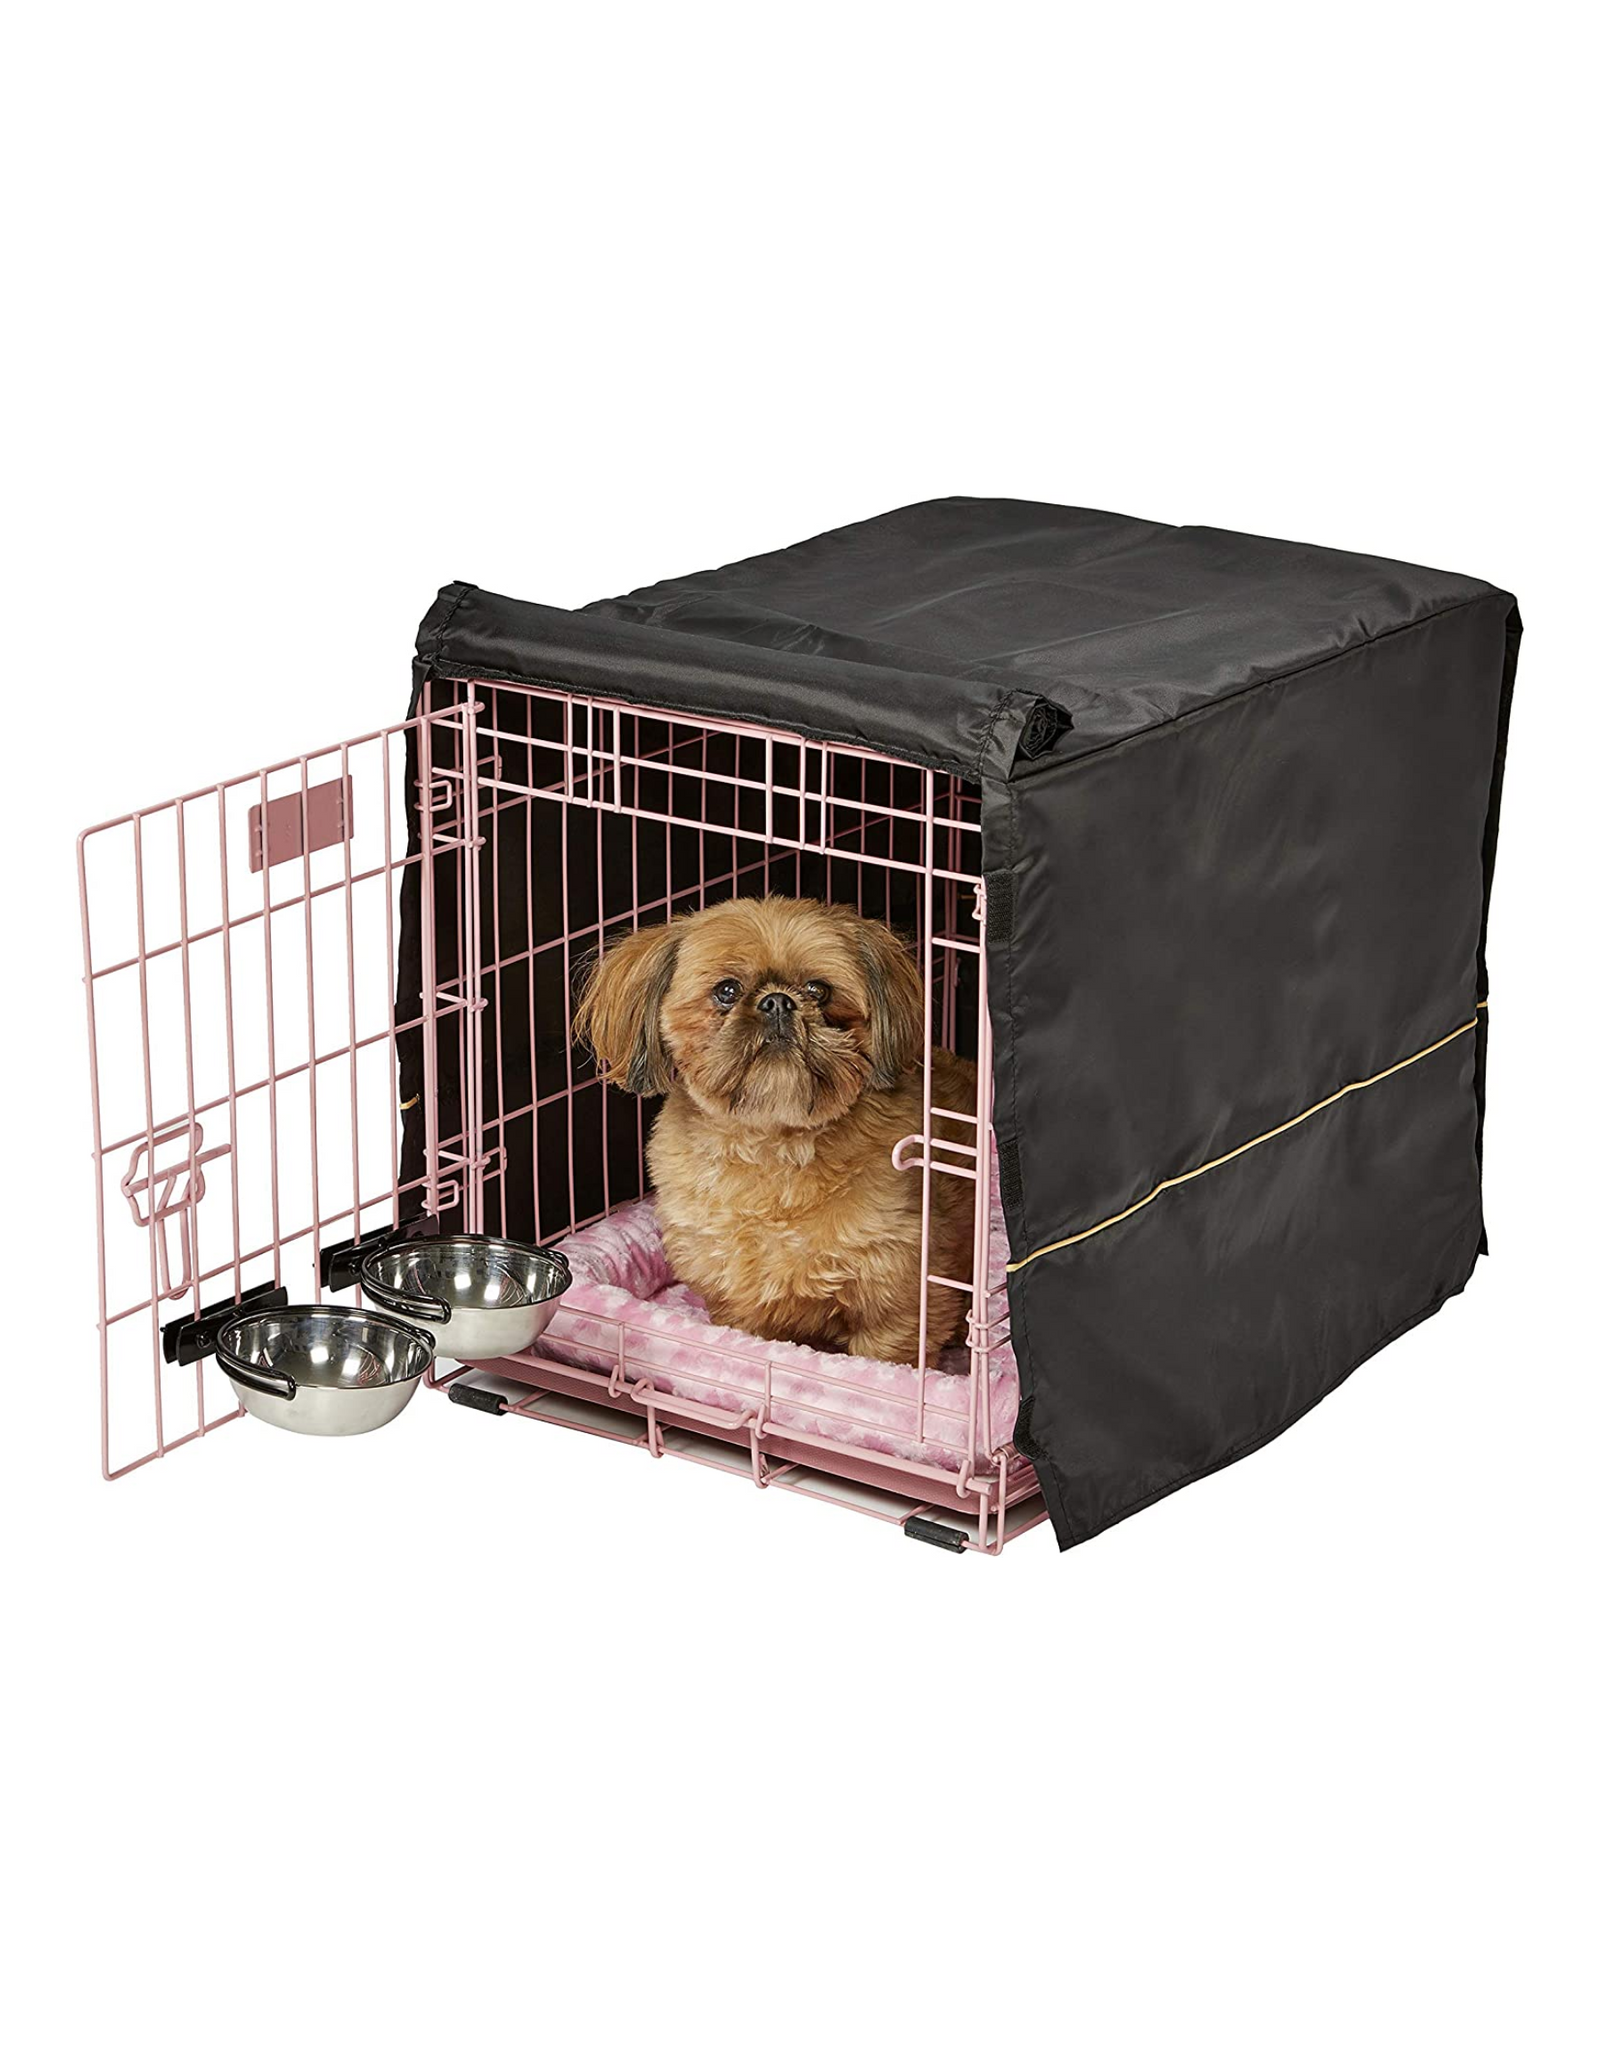 iCrate Dog Crate Starter Kit 24-Inch, Ideal for Small Dog Breeds, Pink